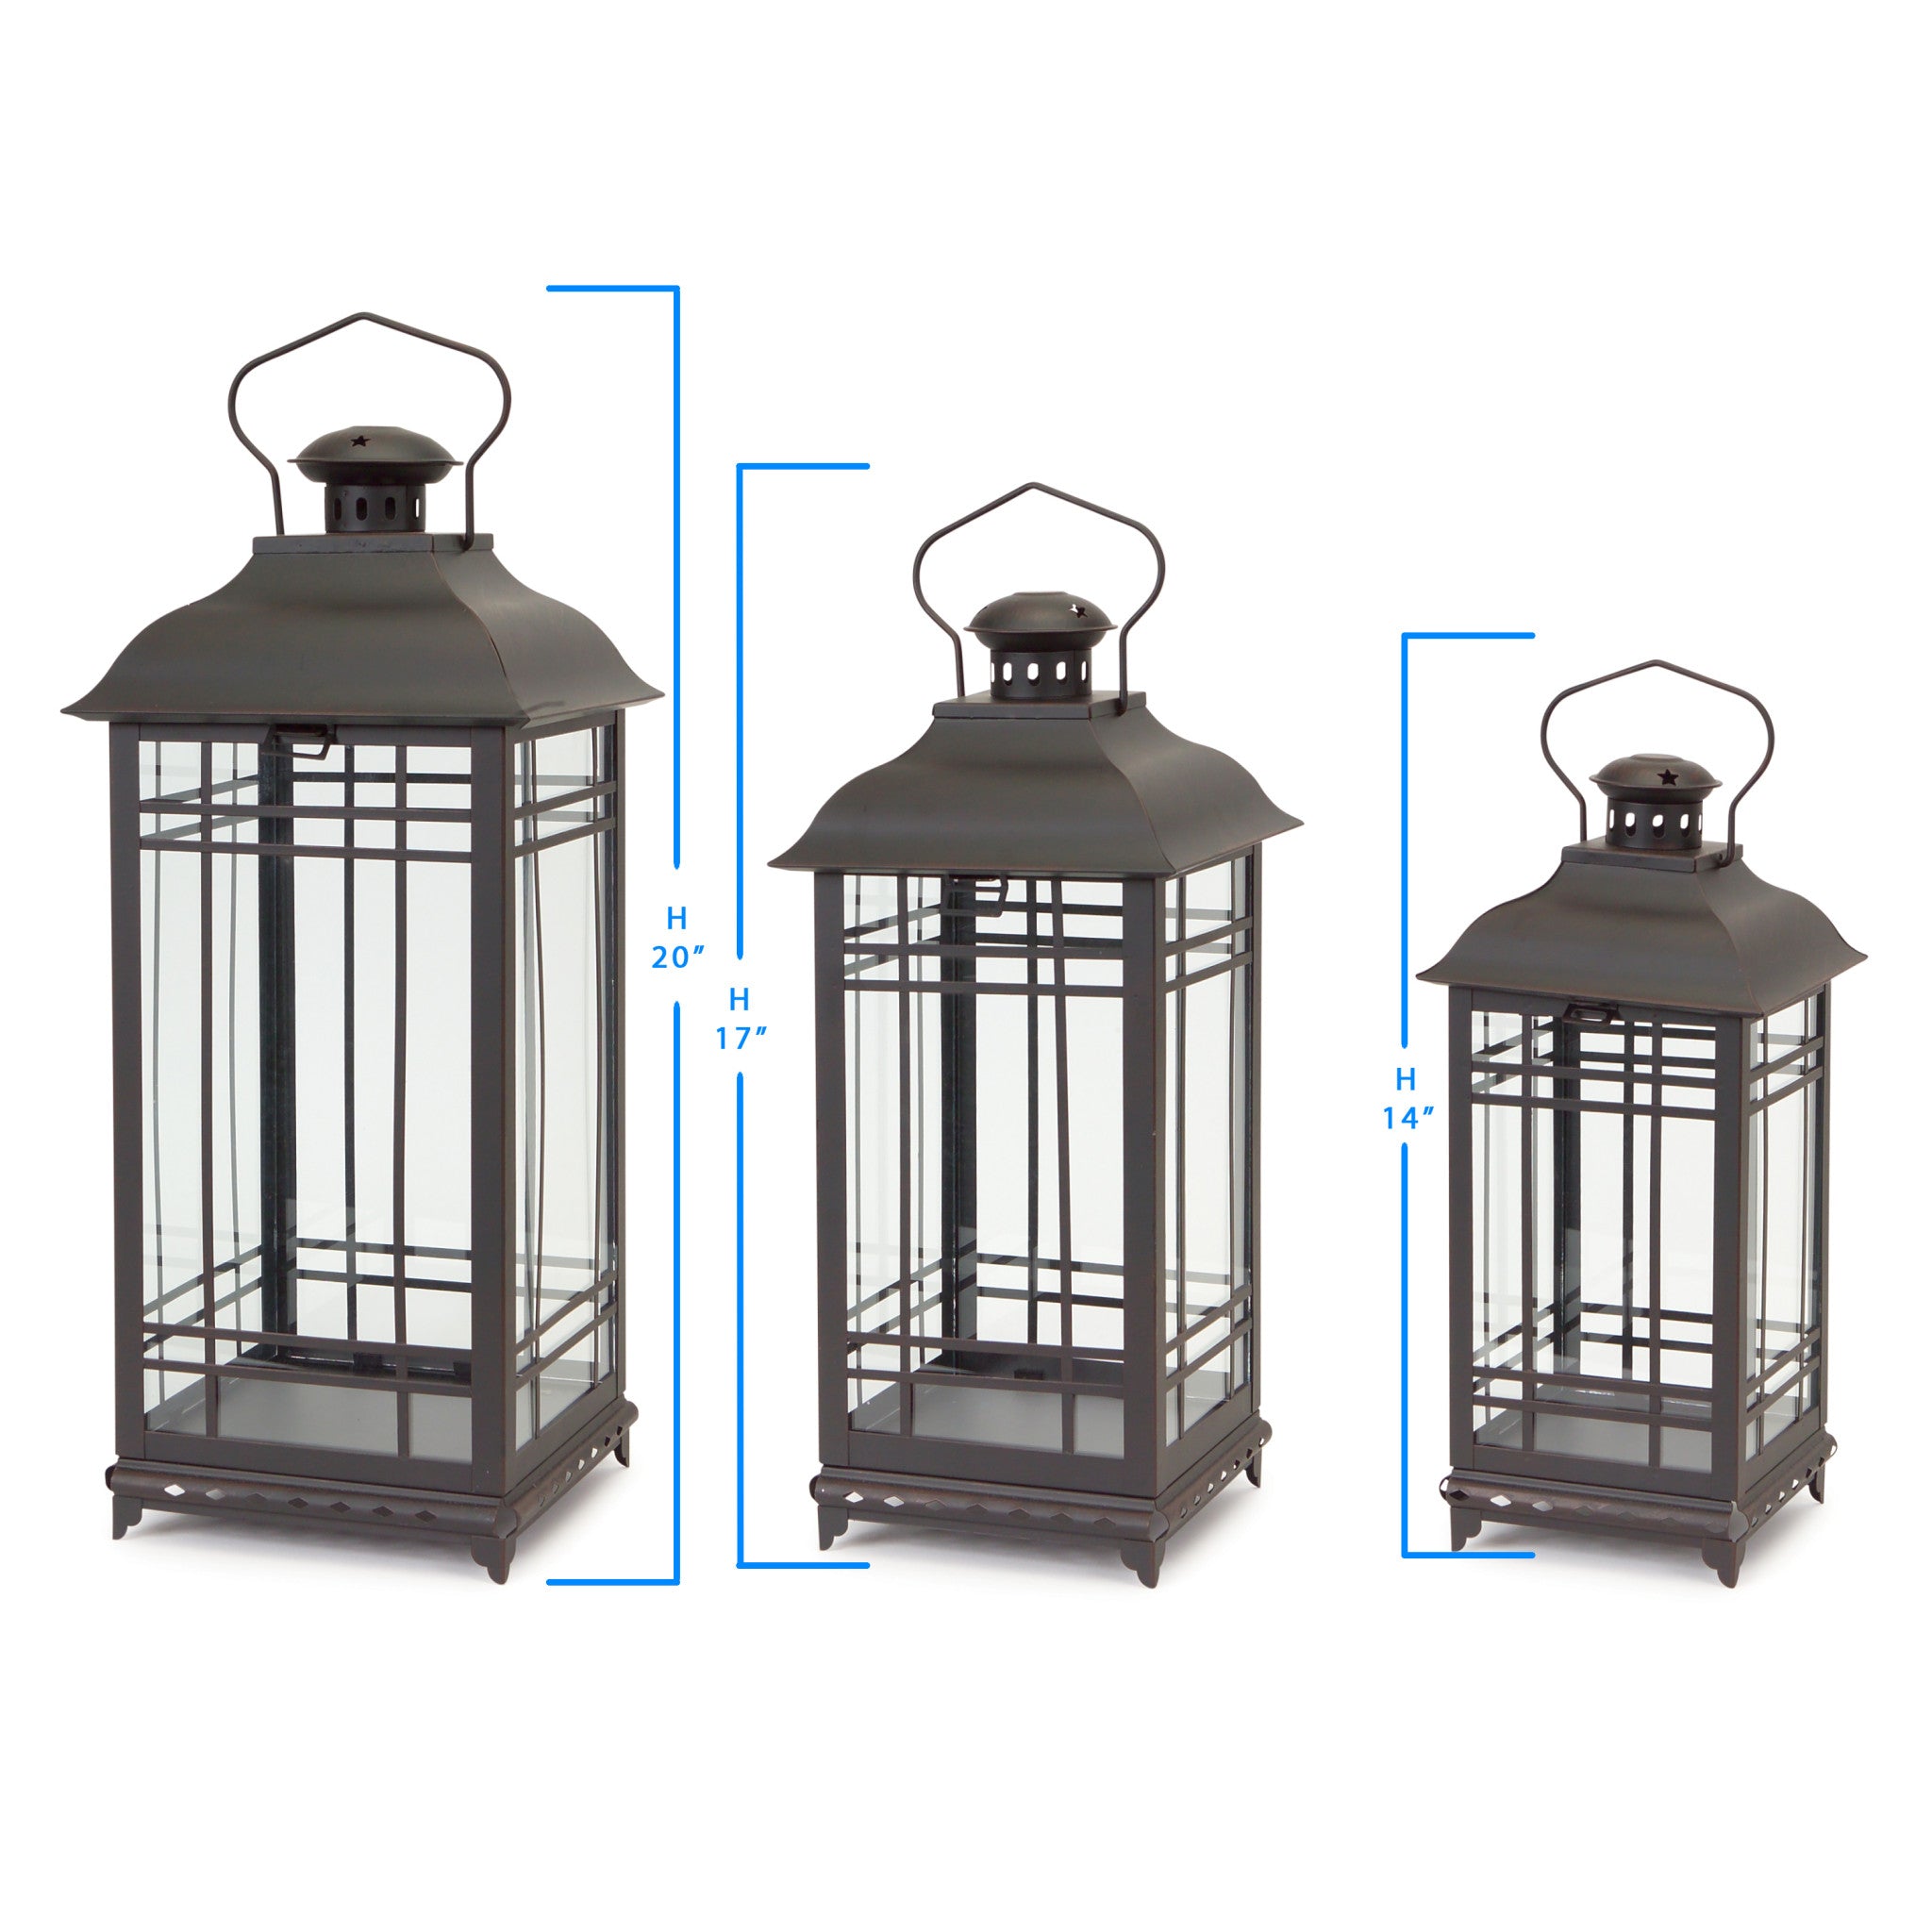 Set Of Three Black Flameless Floor Lantern Candle Holder - Tuesday Morning-Candle Holders